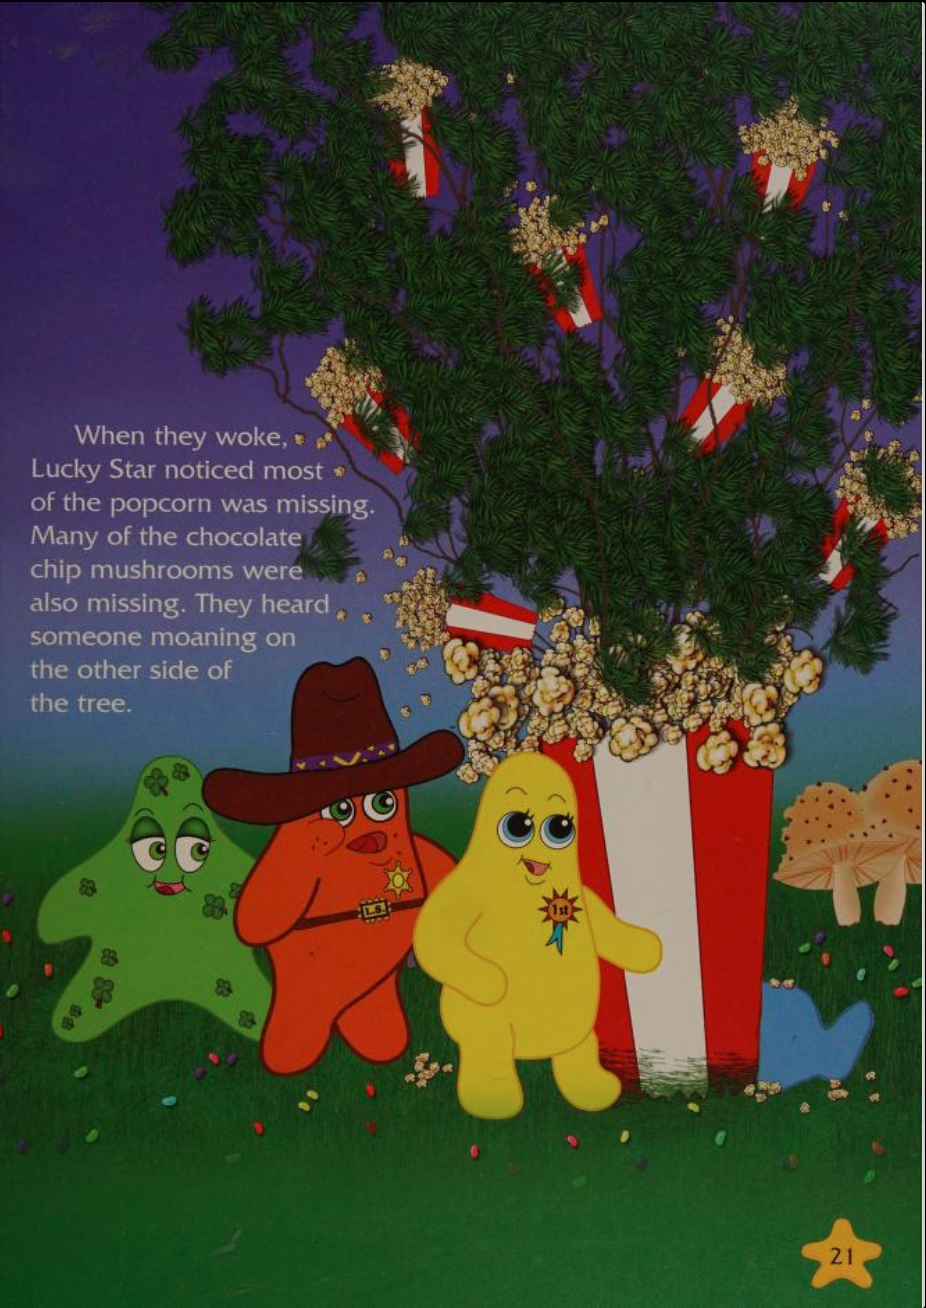 Lucky Star, Lone Star, and First Star are investigating a blue figure behind a popcorn tree growing out of a popcorn bucket. The stars are drawn in a 2D style, but the popcorn tree is a mix of more realistic 3D image elements for the leaves and popcorn